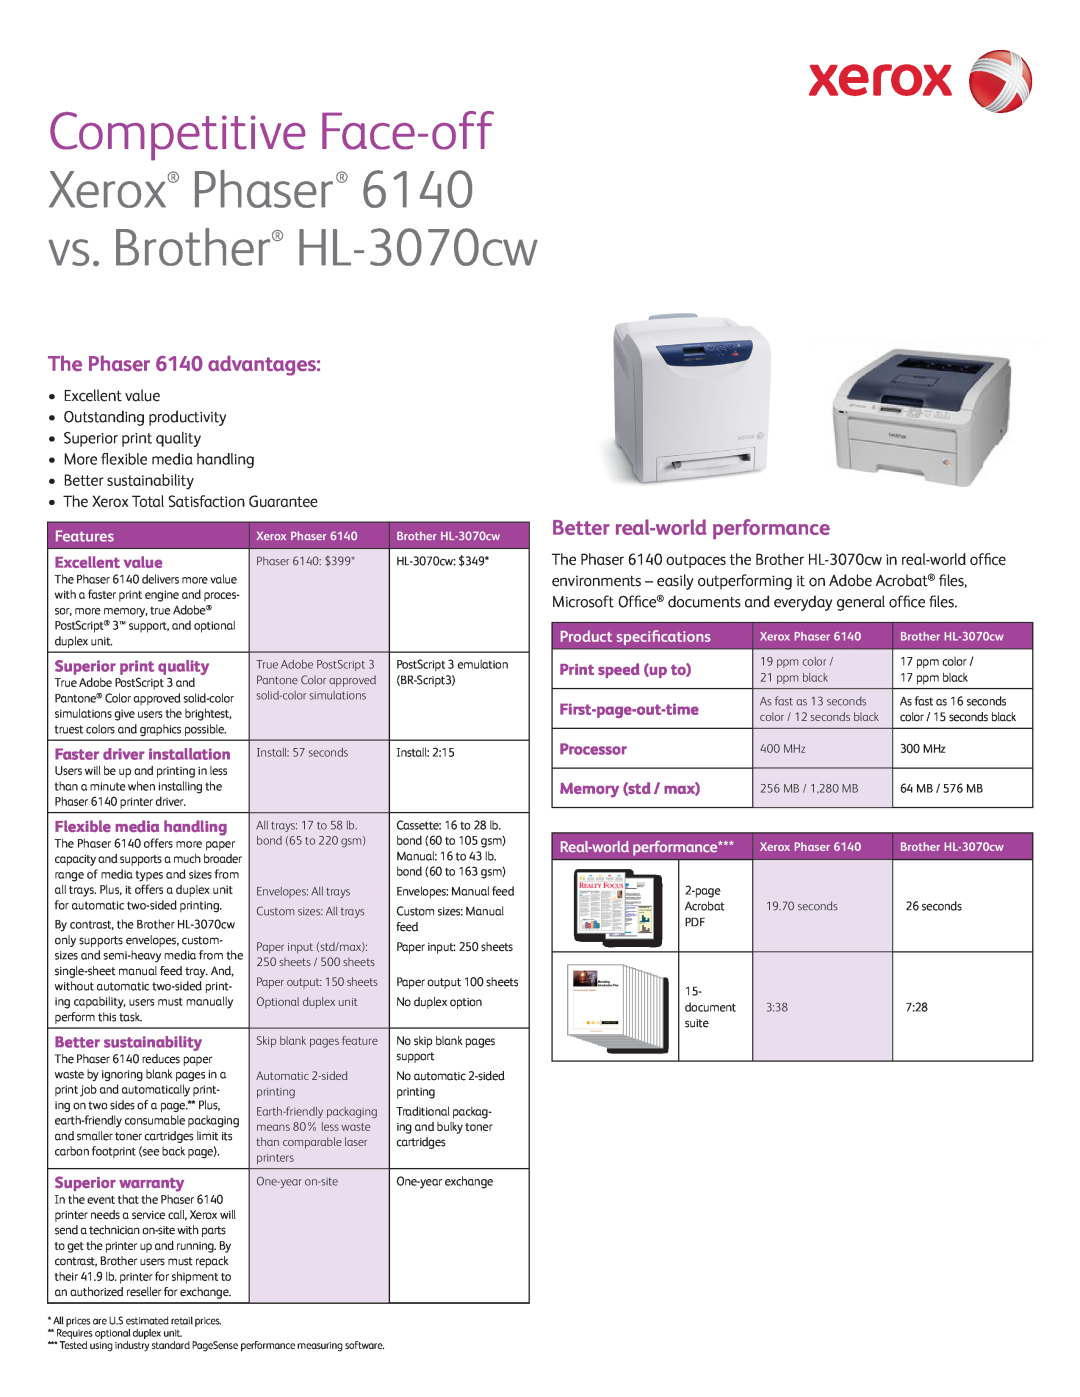 Xerox HL-3070CW warranty The Phaser 6140 advantages, Better real-worldperformance, Features, Product specifications 